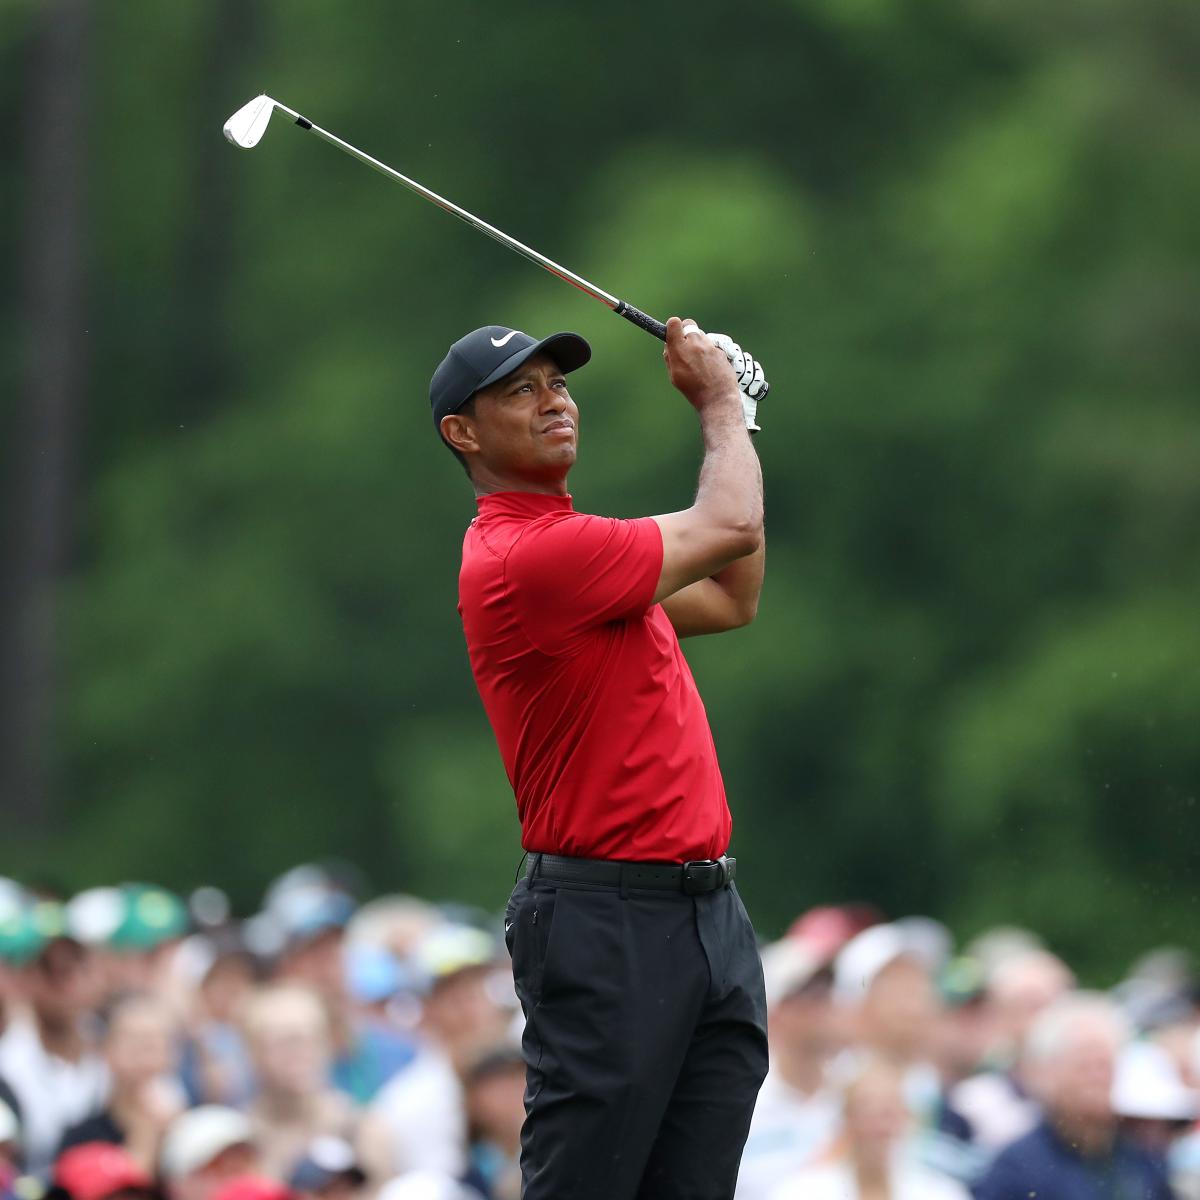 Tiger Woods Wins Dramatic 2019 Masters for His 1st Major ...